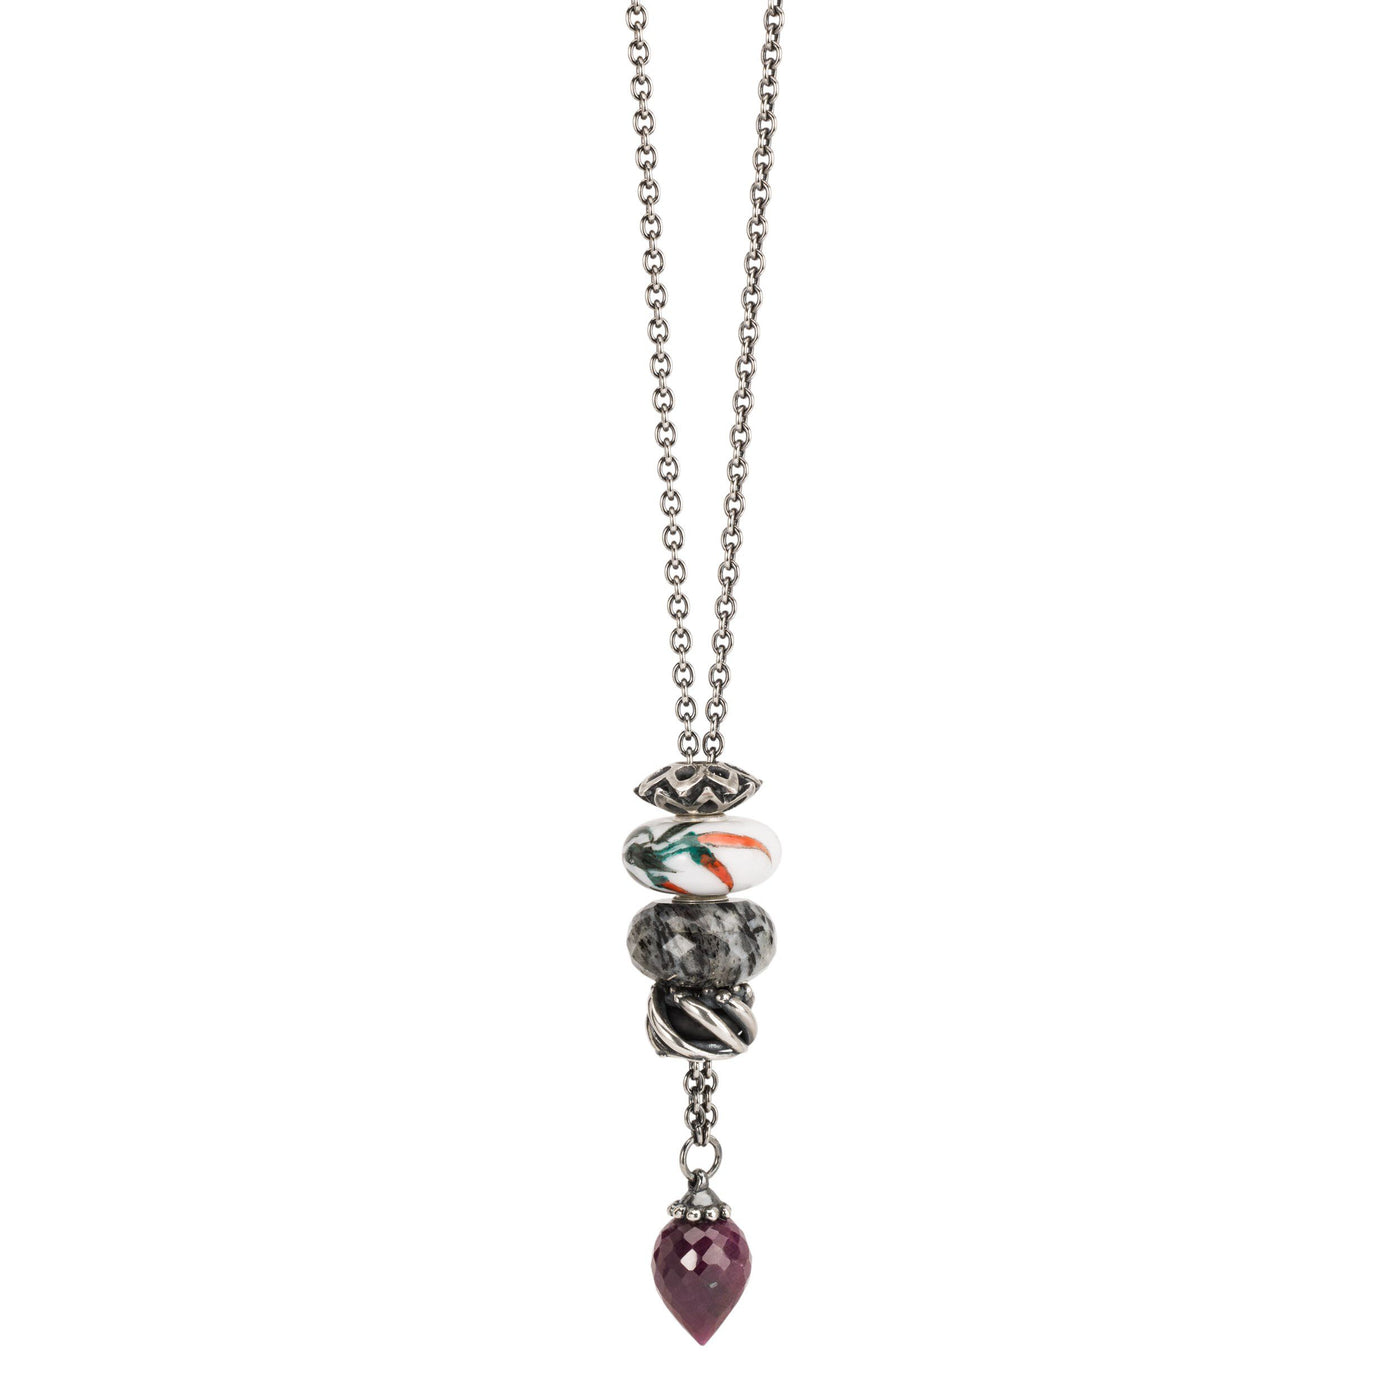 Fantasy Necklace with Ruby - Trollbeads Canada